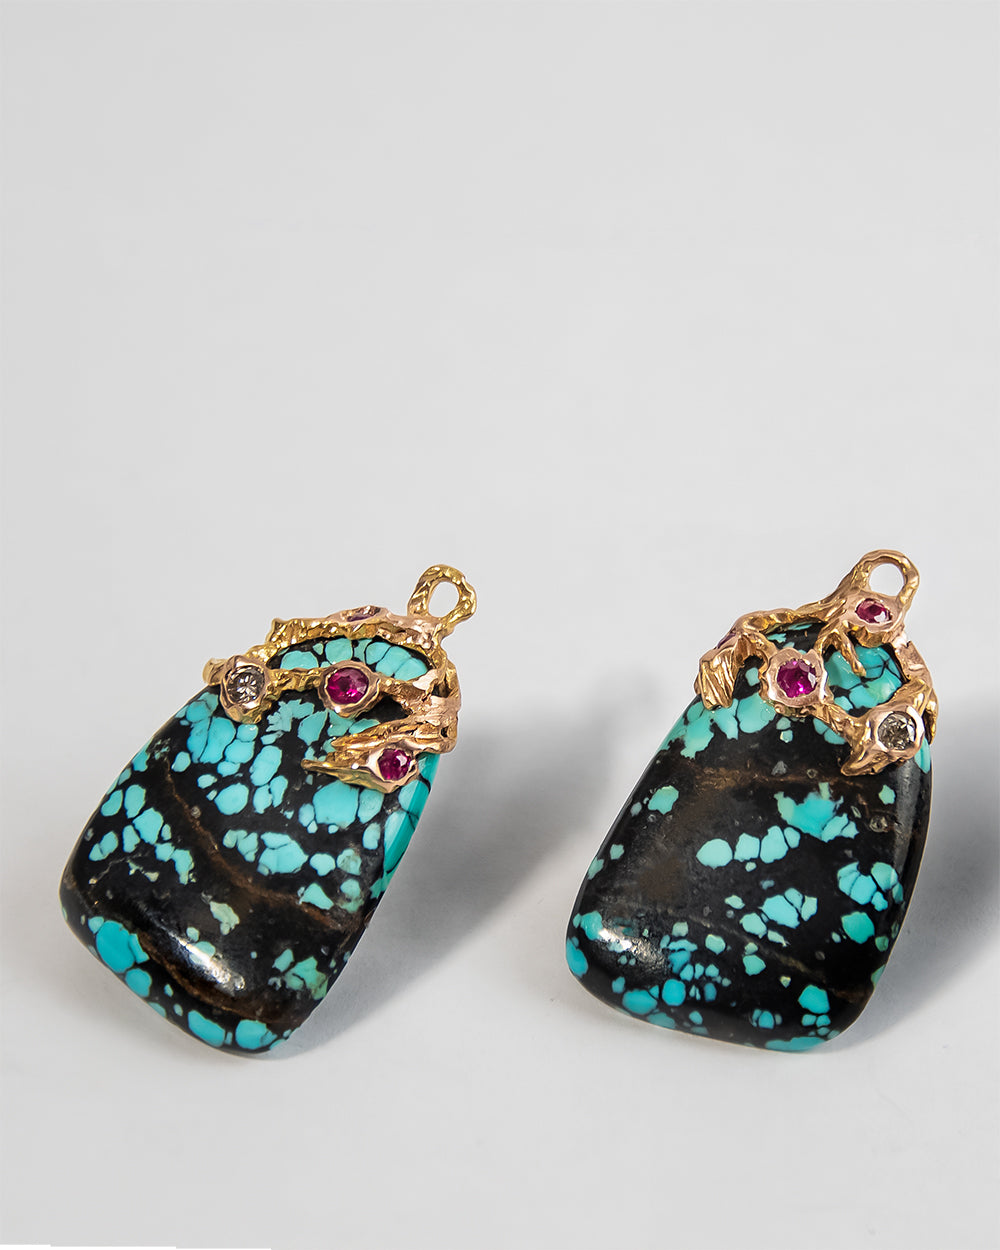 Lava detachable drops crafted from 18K Rose Gold featuring Turquoise, Rubies, and Diamonds